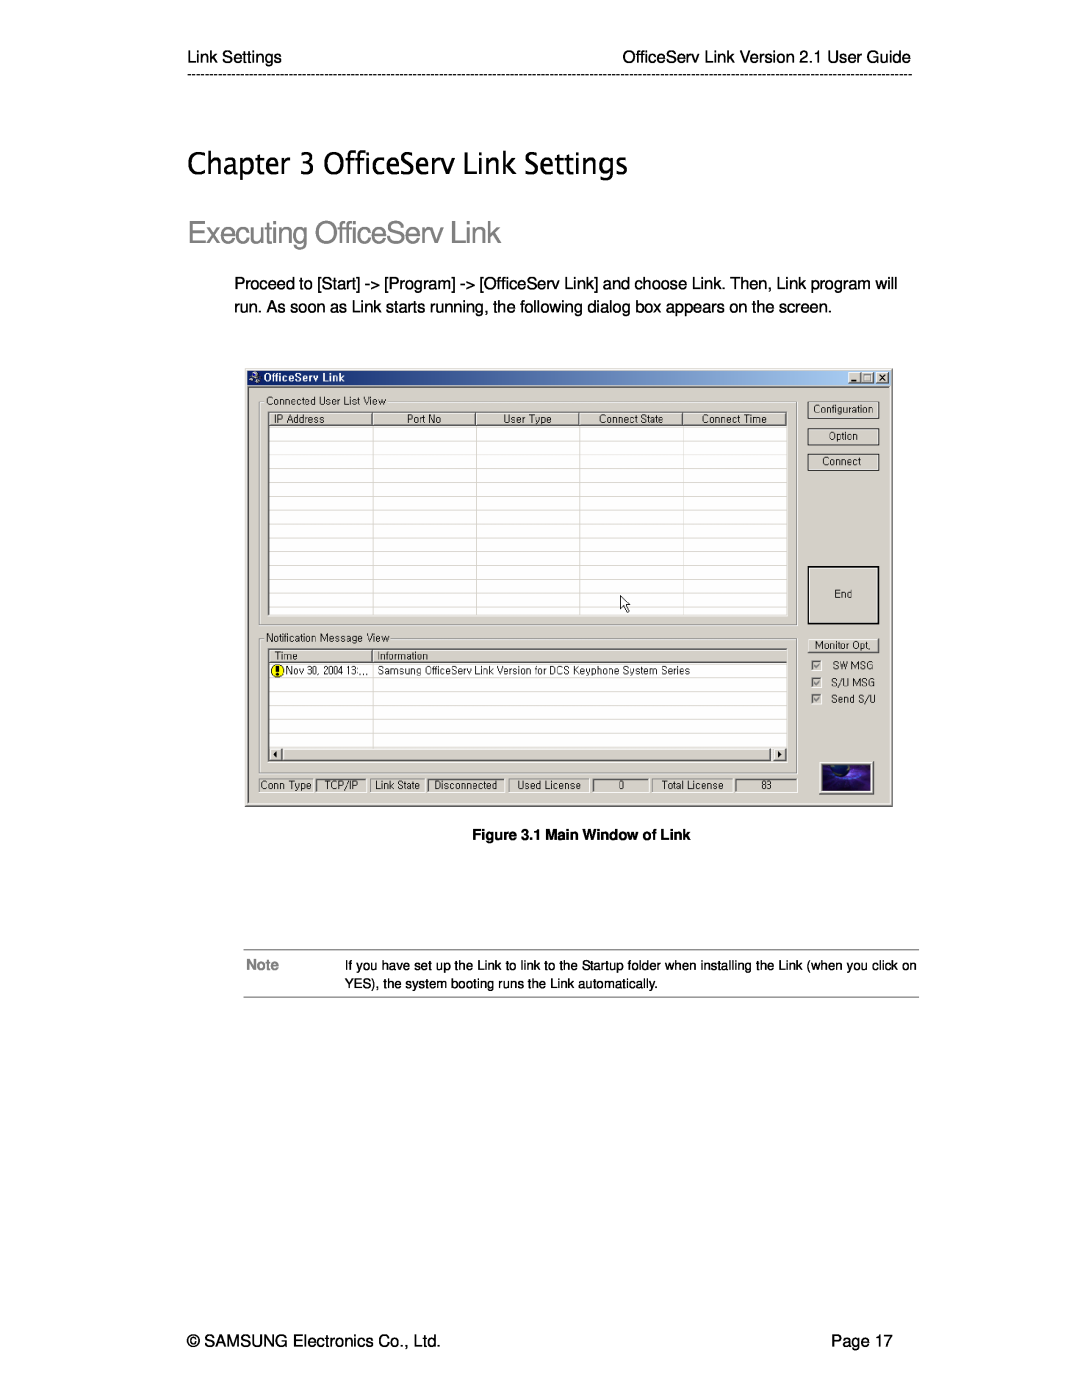 Samsung Version 2.1 manual OfficeServ Link Settings, Executing OfficeServ Link, Page, 1 Main Window of Link 